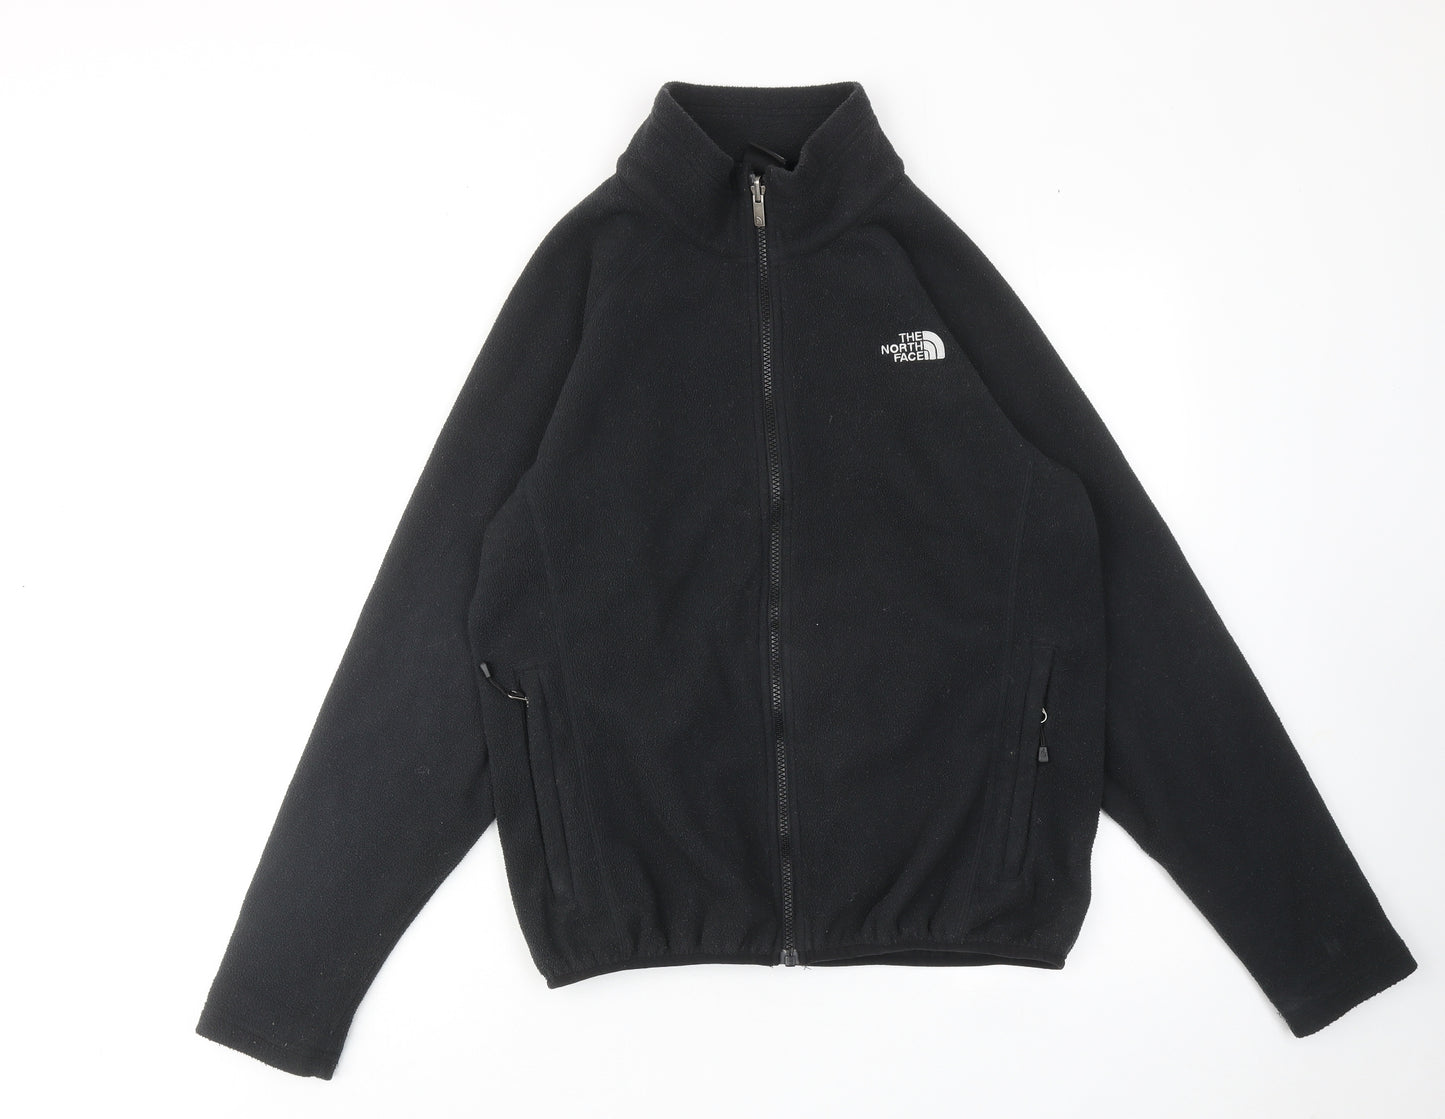 The North Face Mens Black Jacket Size S Zip